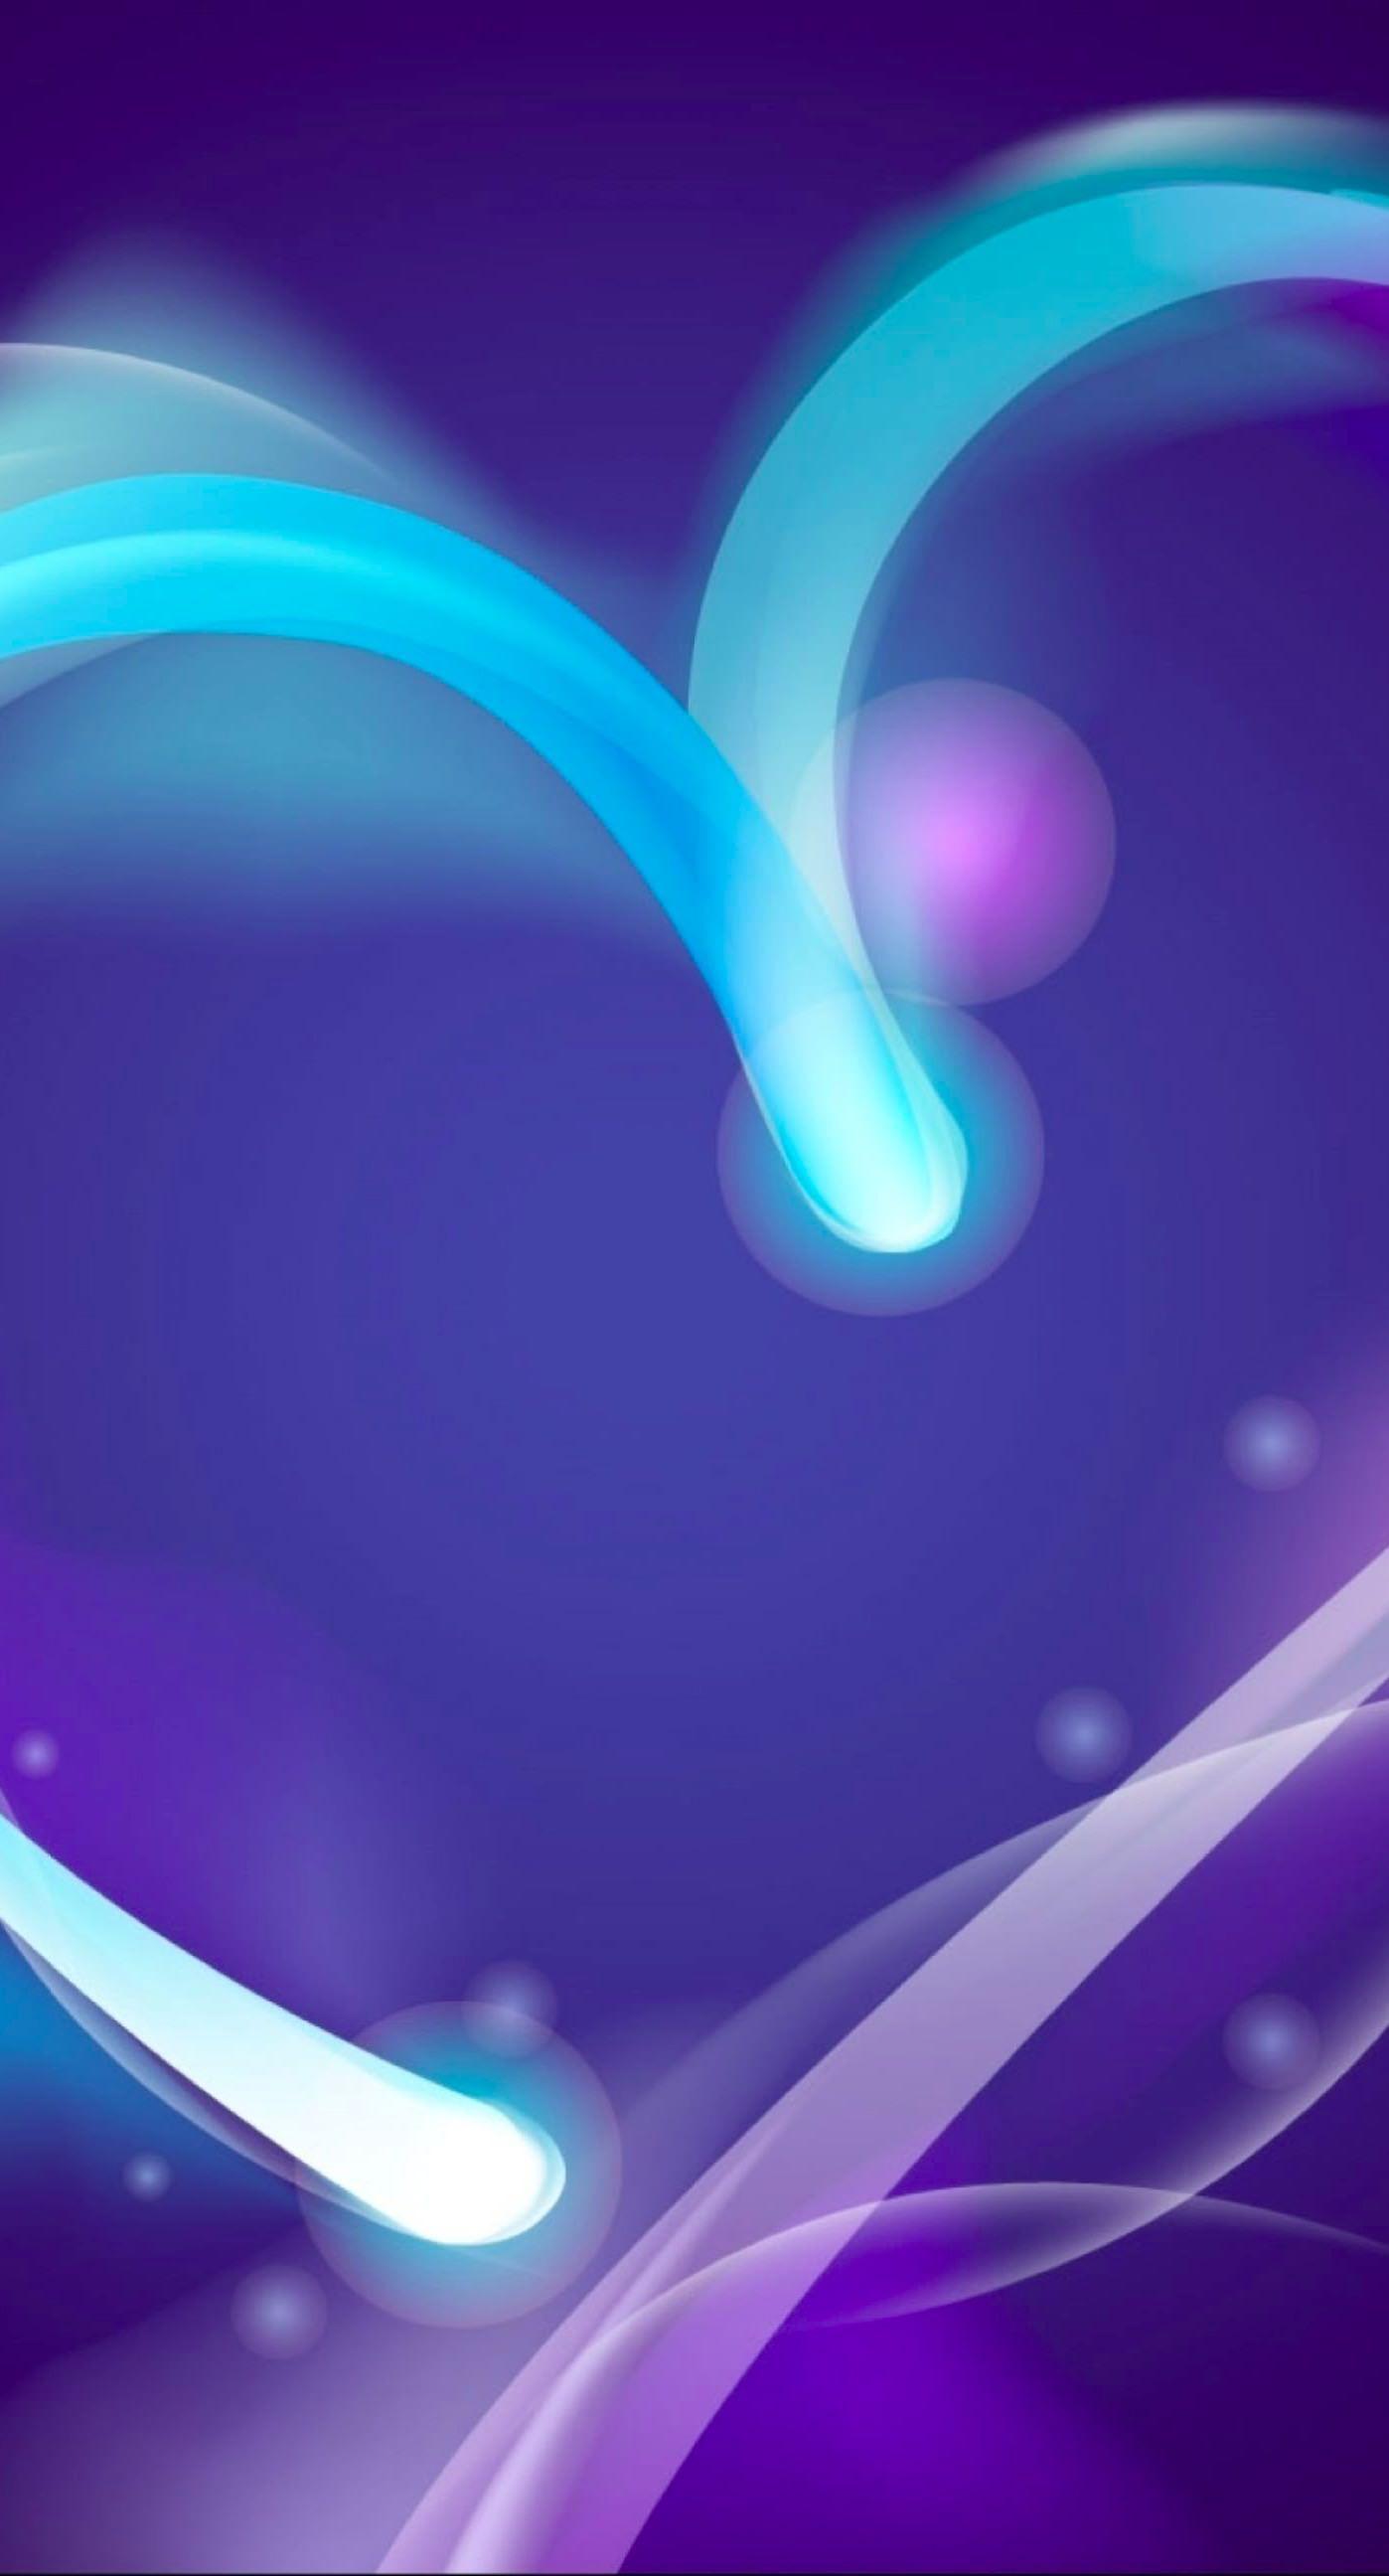 Cute Purple Wallpapers For Iphone - Wallpaper Cave